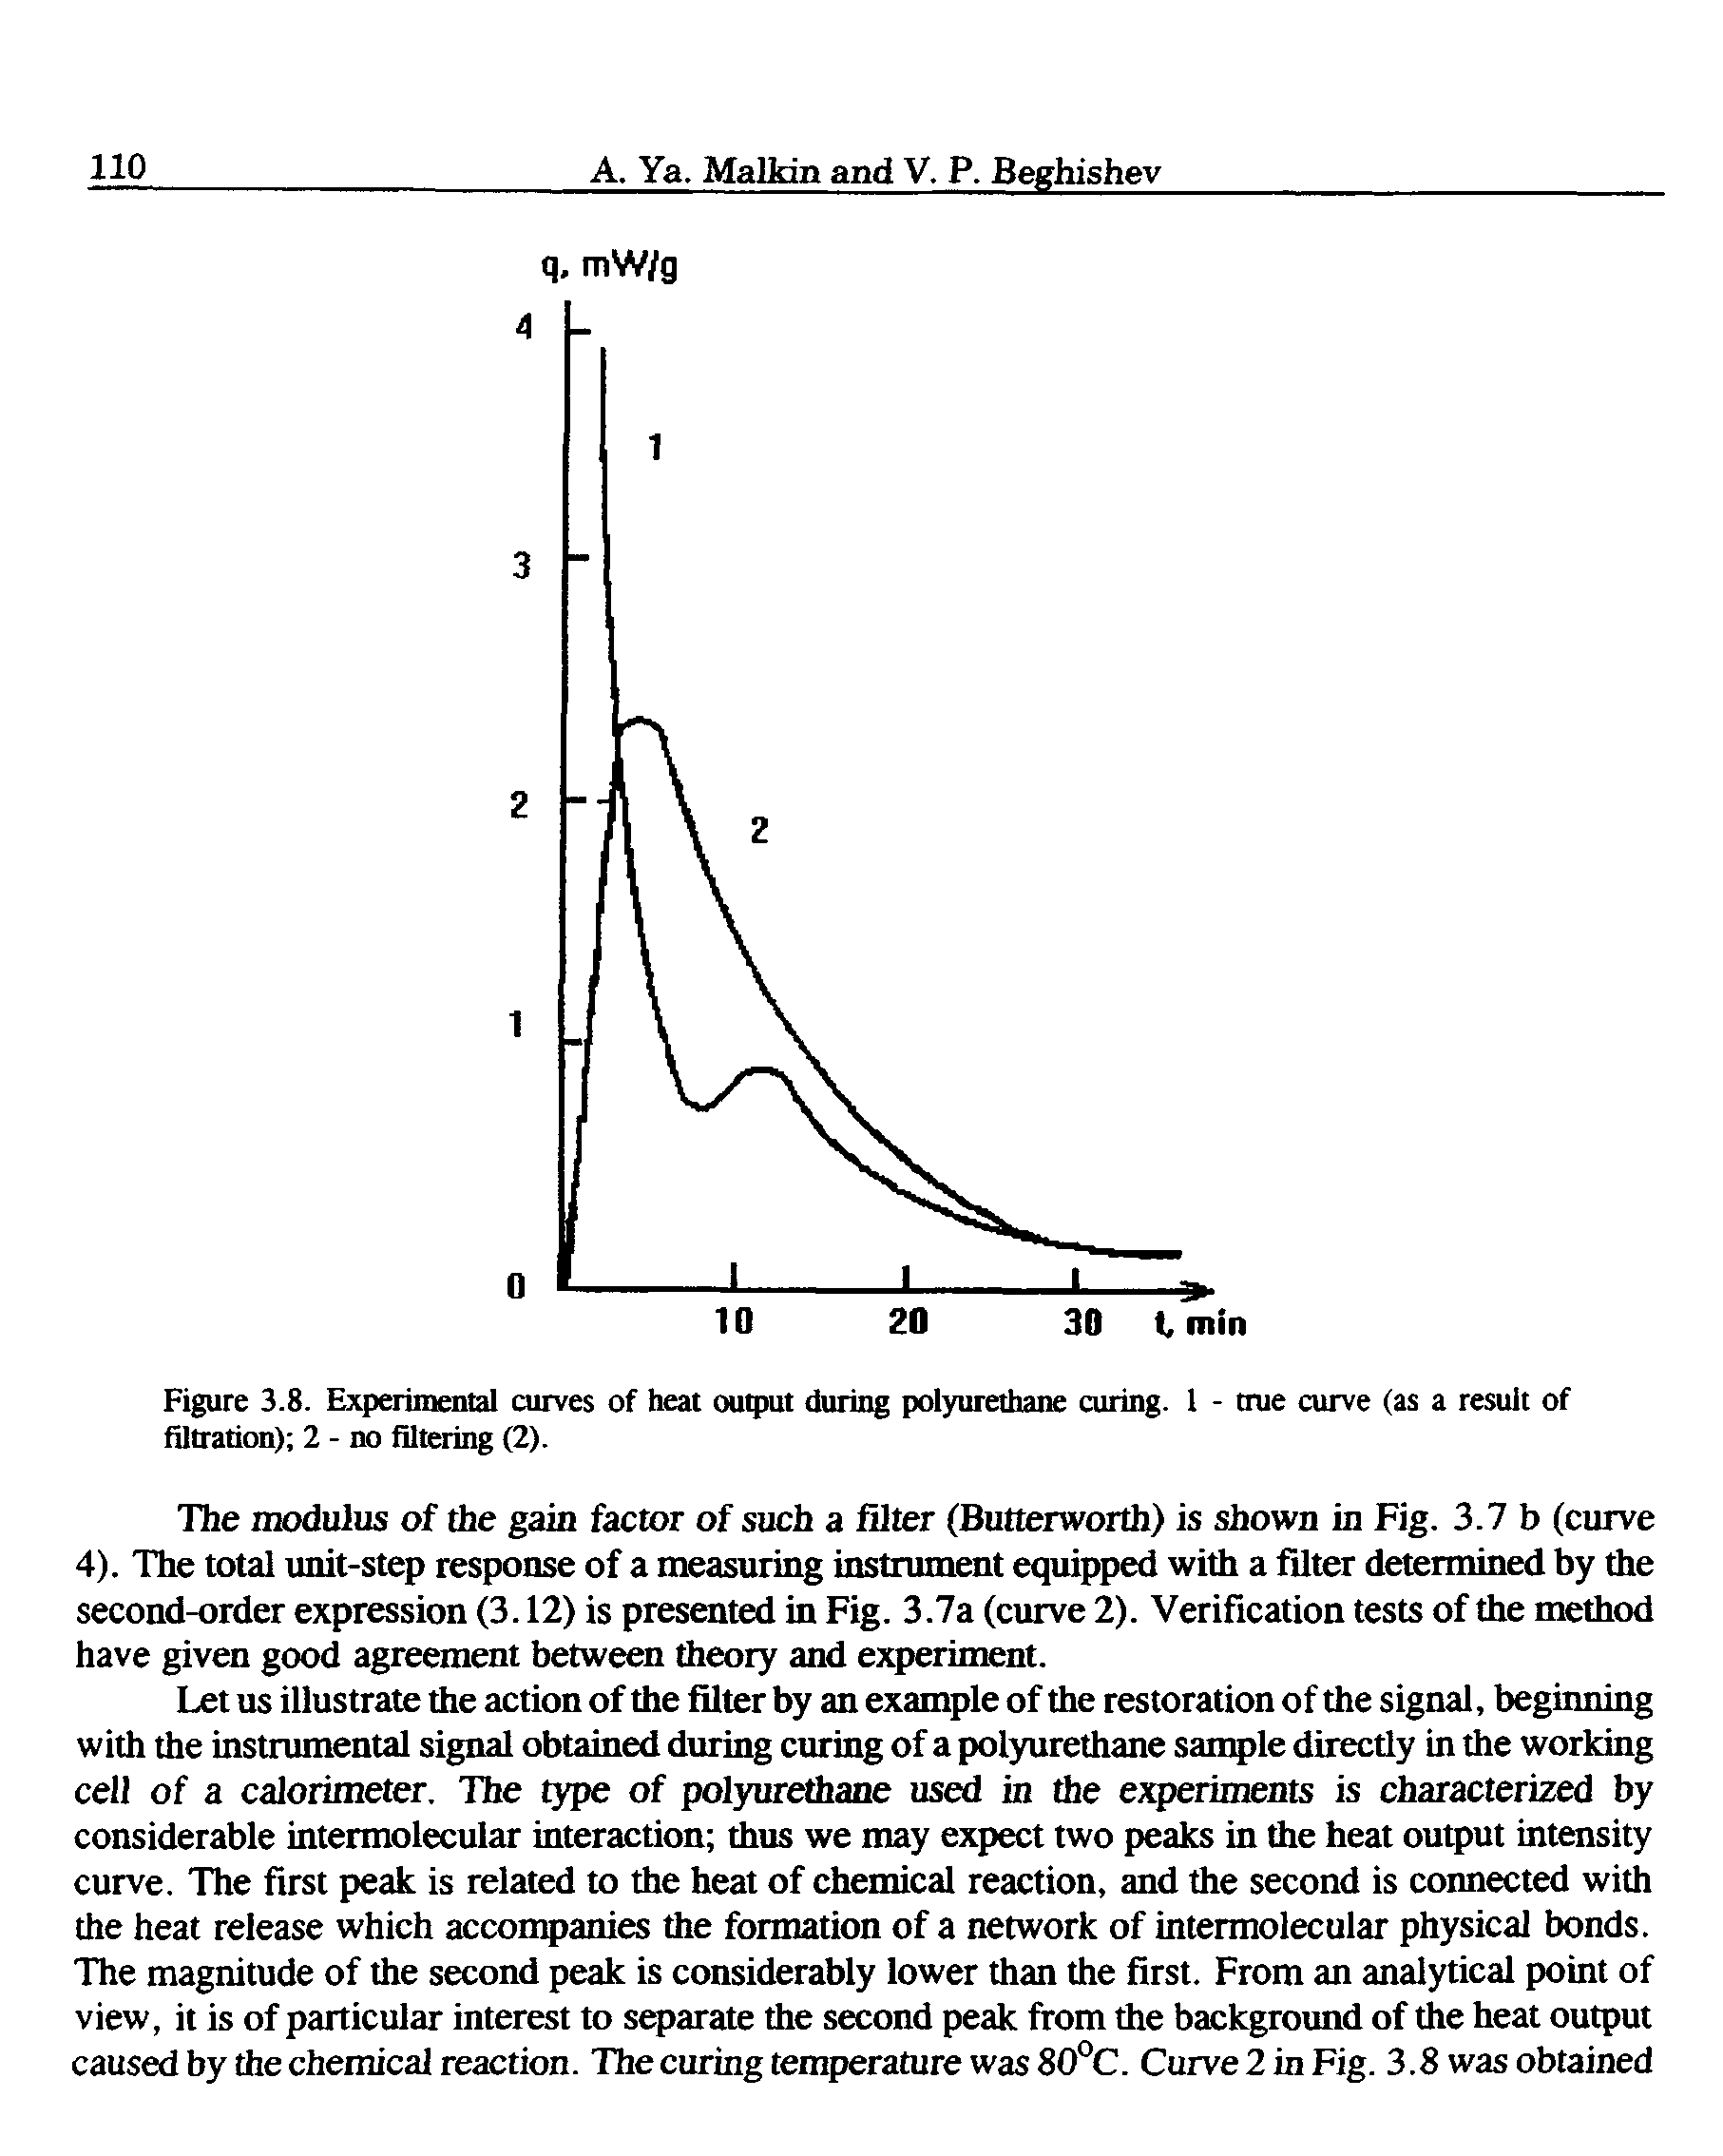 Figure 3.8. Experimental curves of heat output during polyurethane curing. 1 - true curve (as a result of filtration) 2 - no filtering (2).